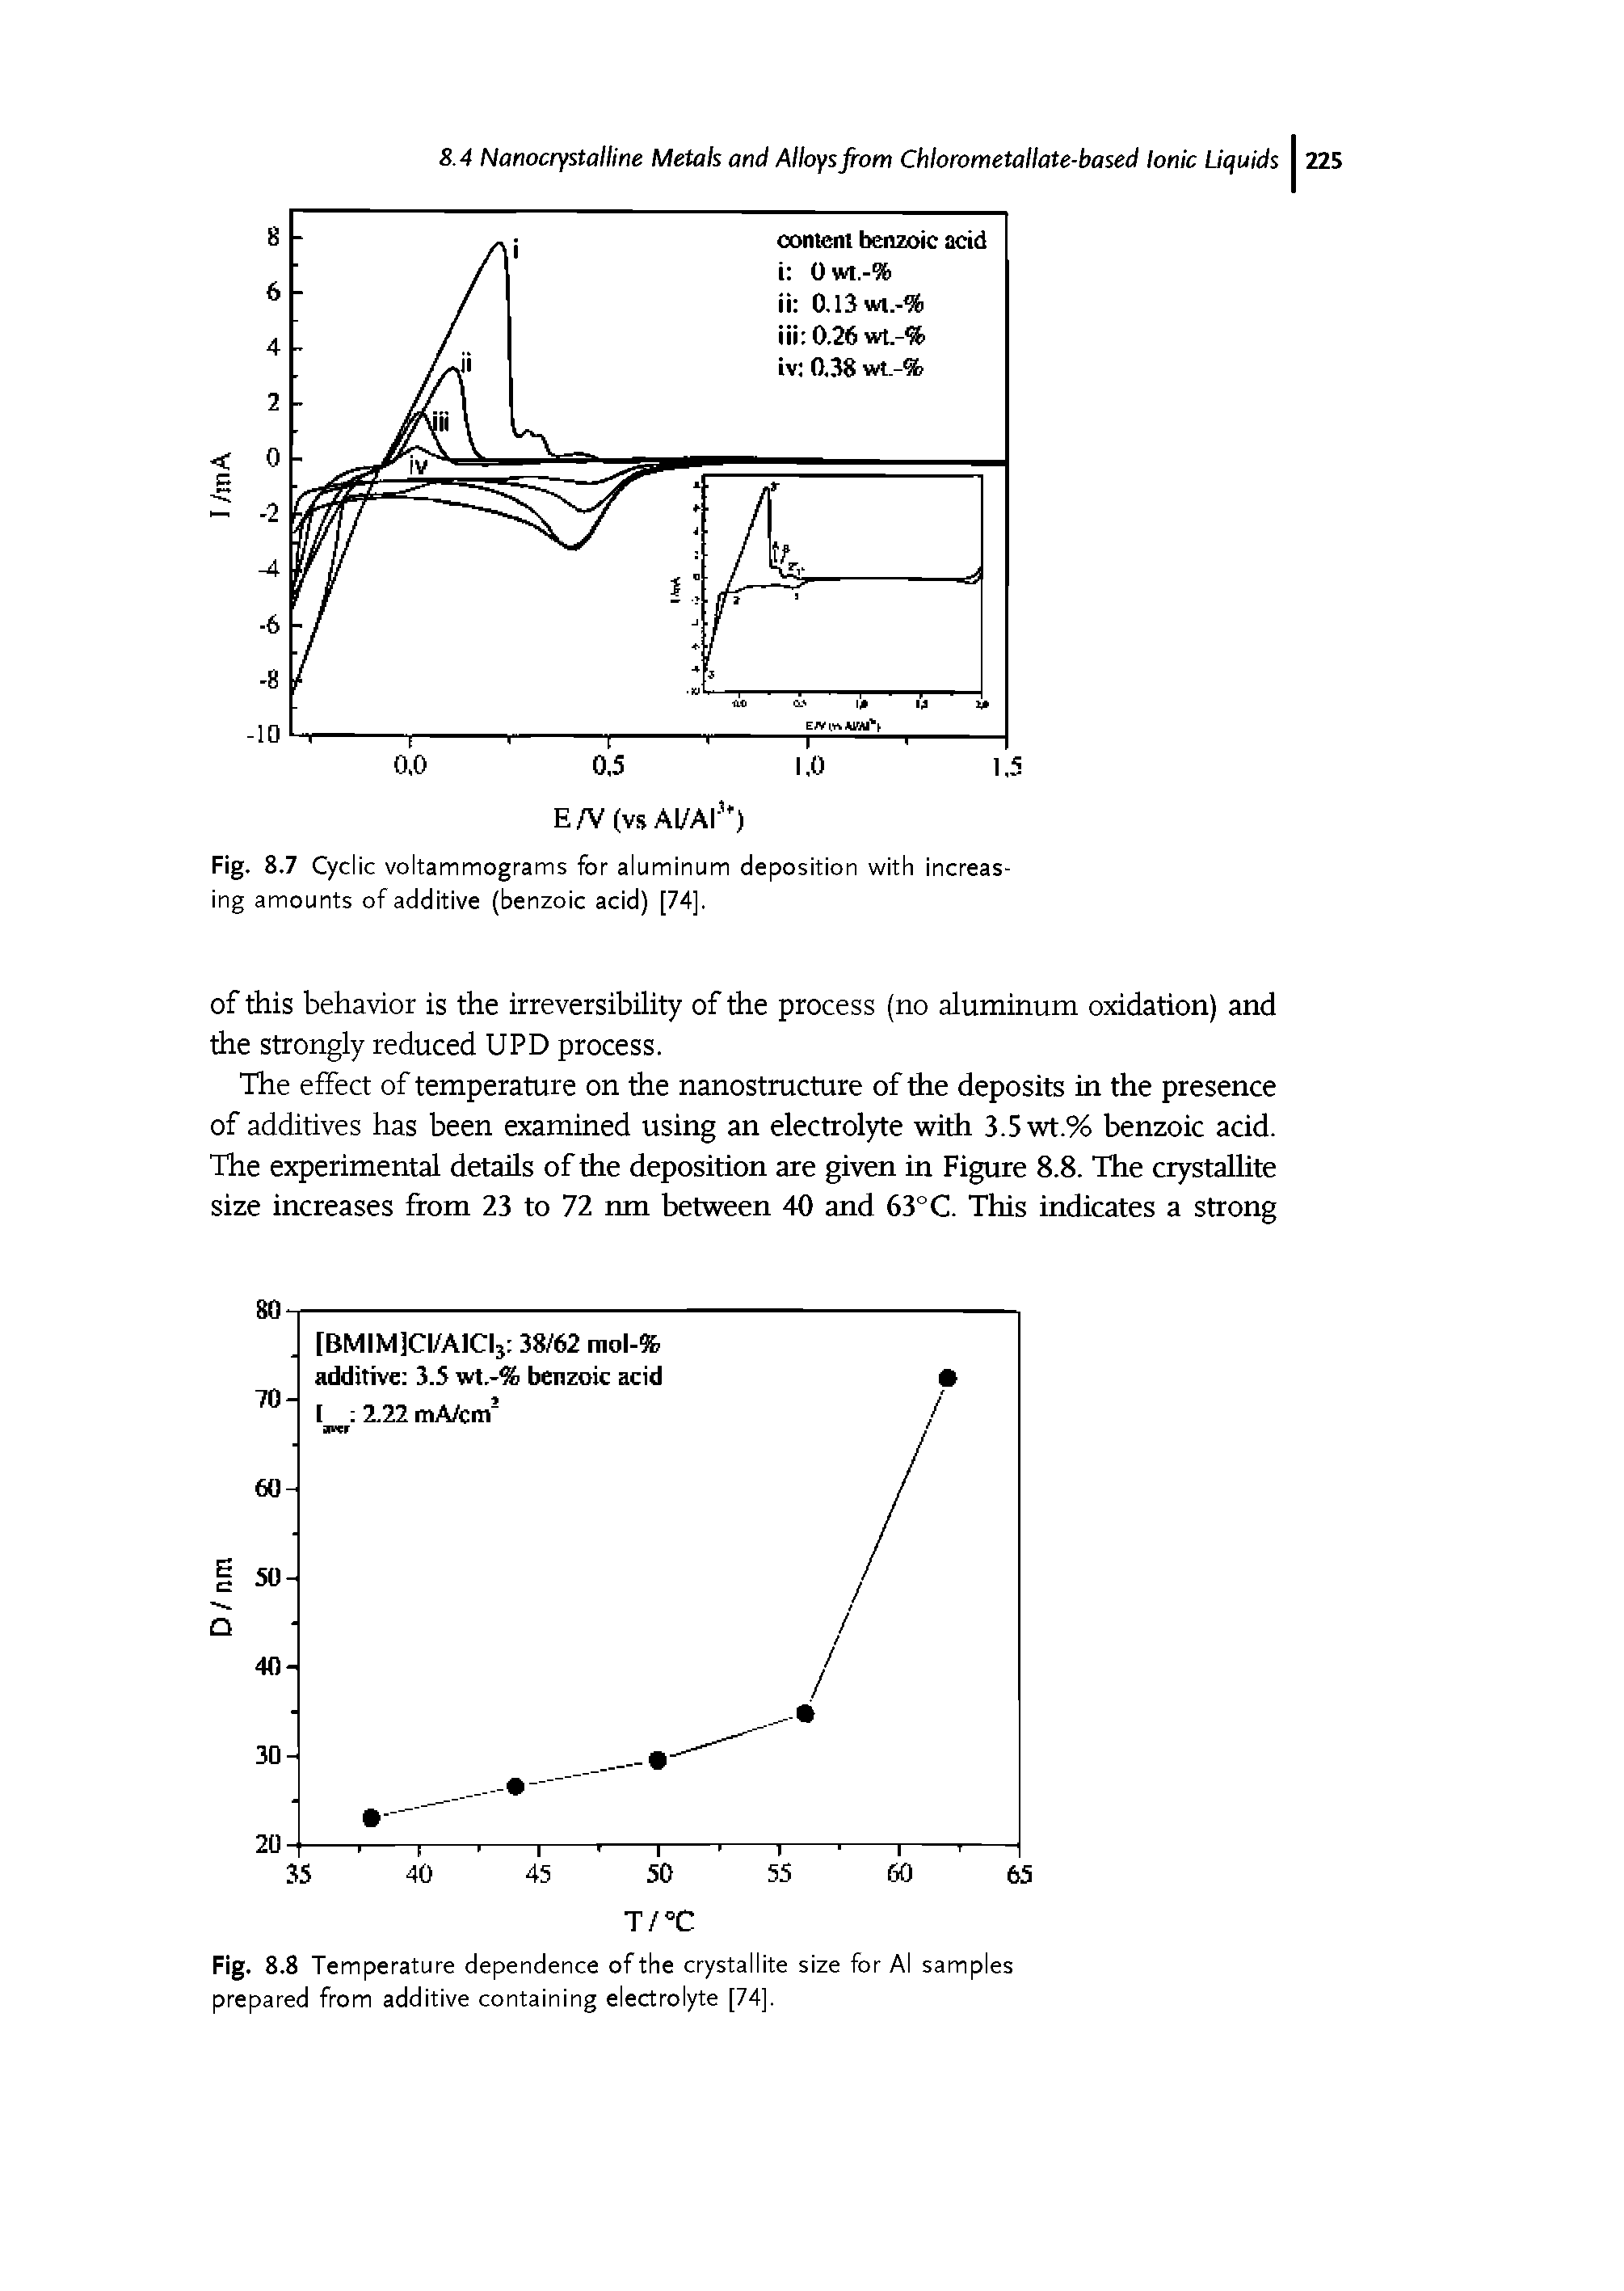 Fig. 8.7 Cyclic voltammograms for aluminum deposition with increasing amounts of additive (benzoic acid) [74].